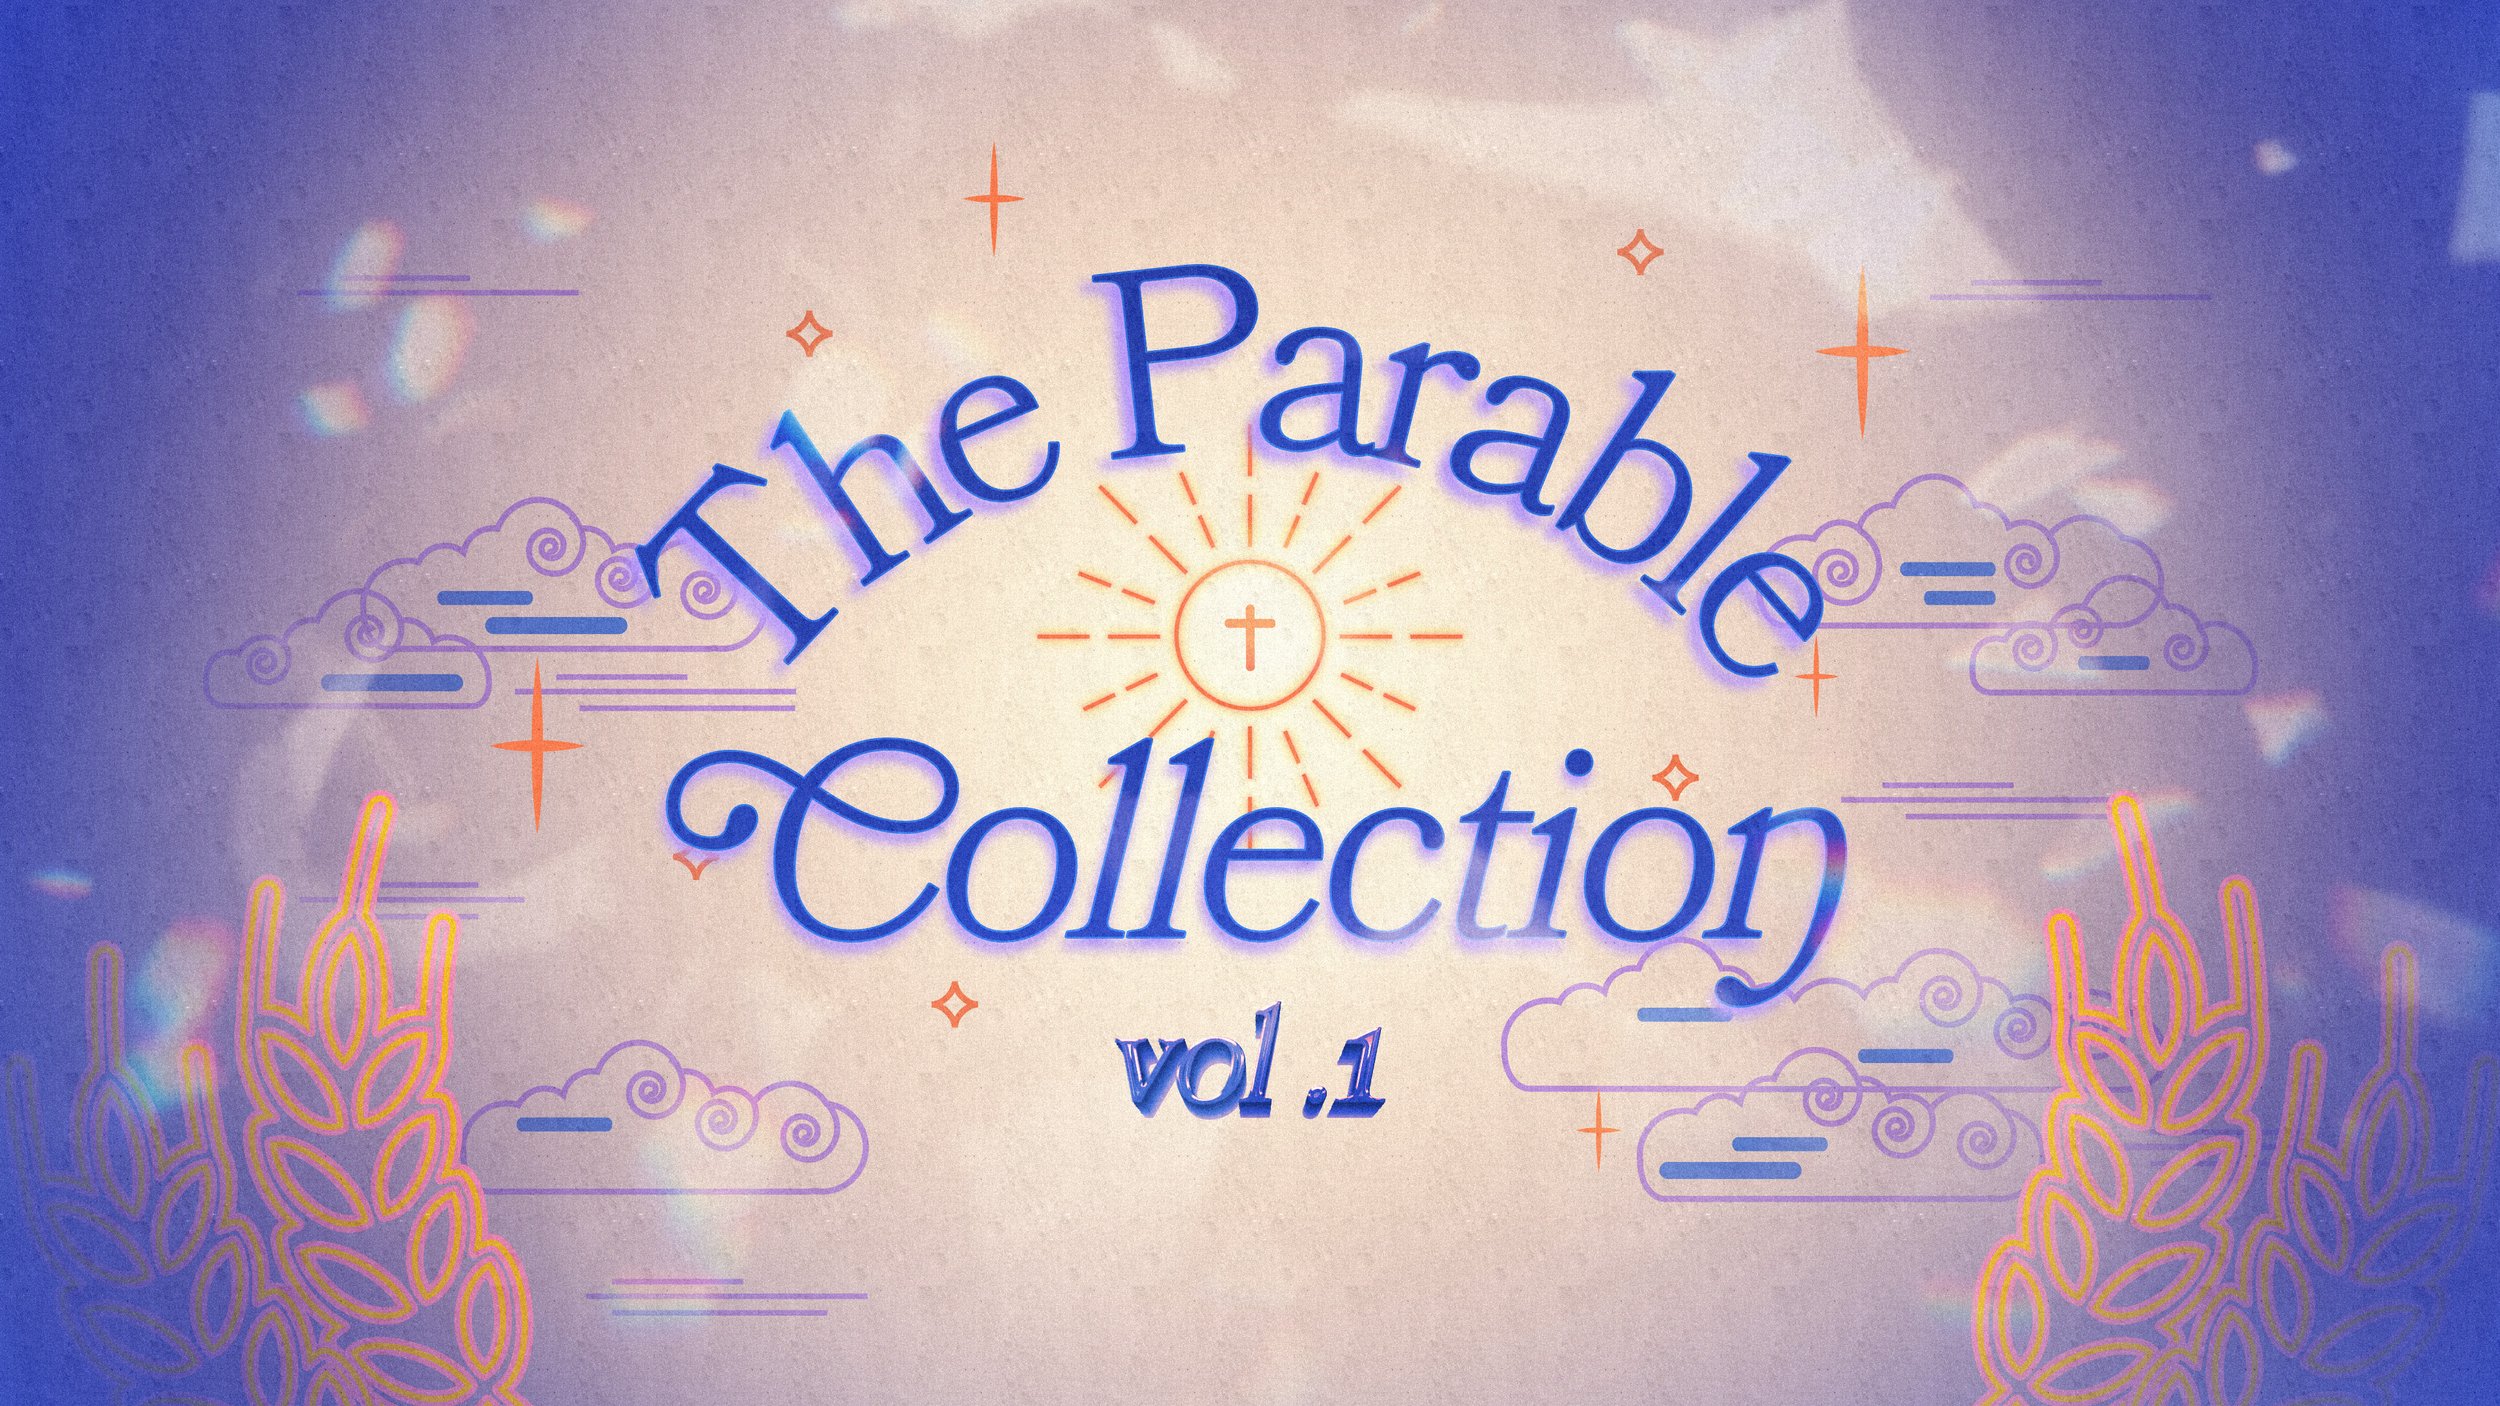 TheParableCollection-Vol1-Title.jpg